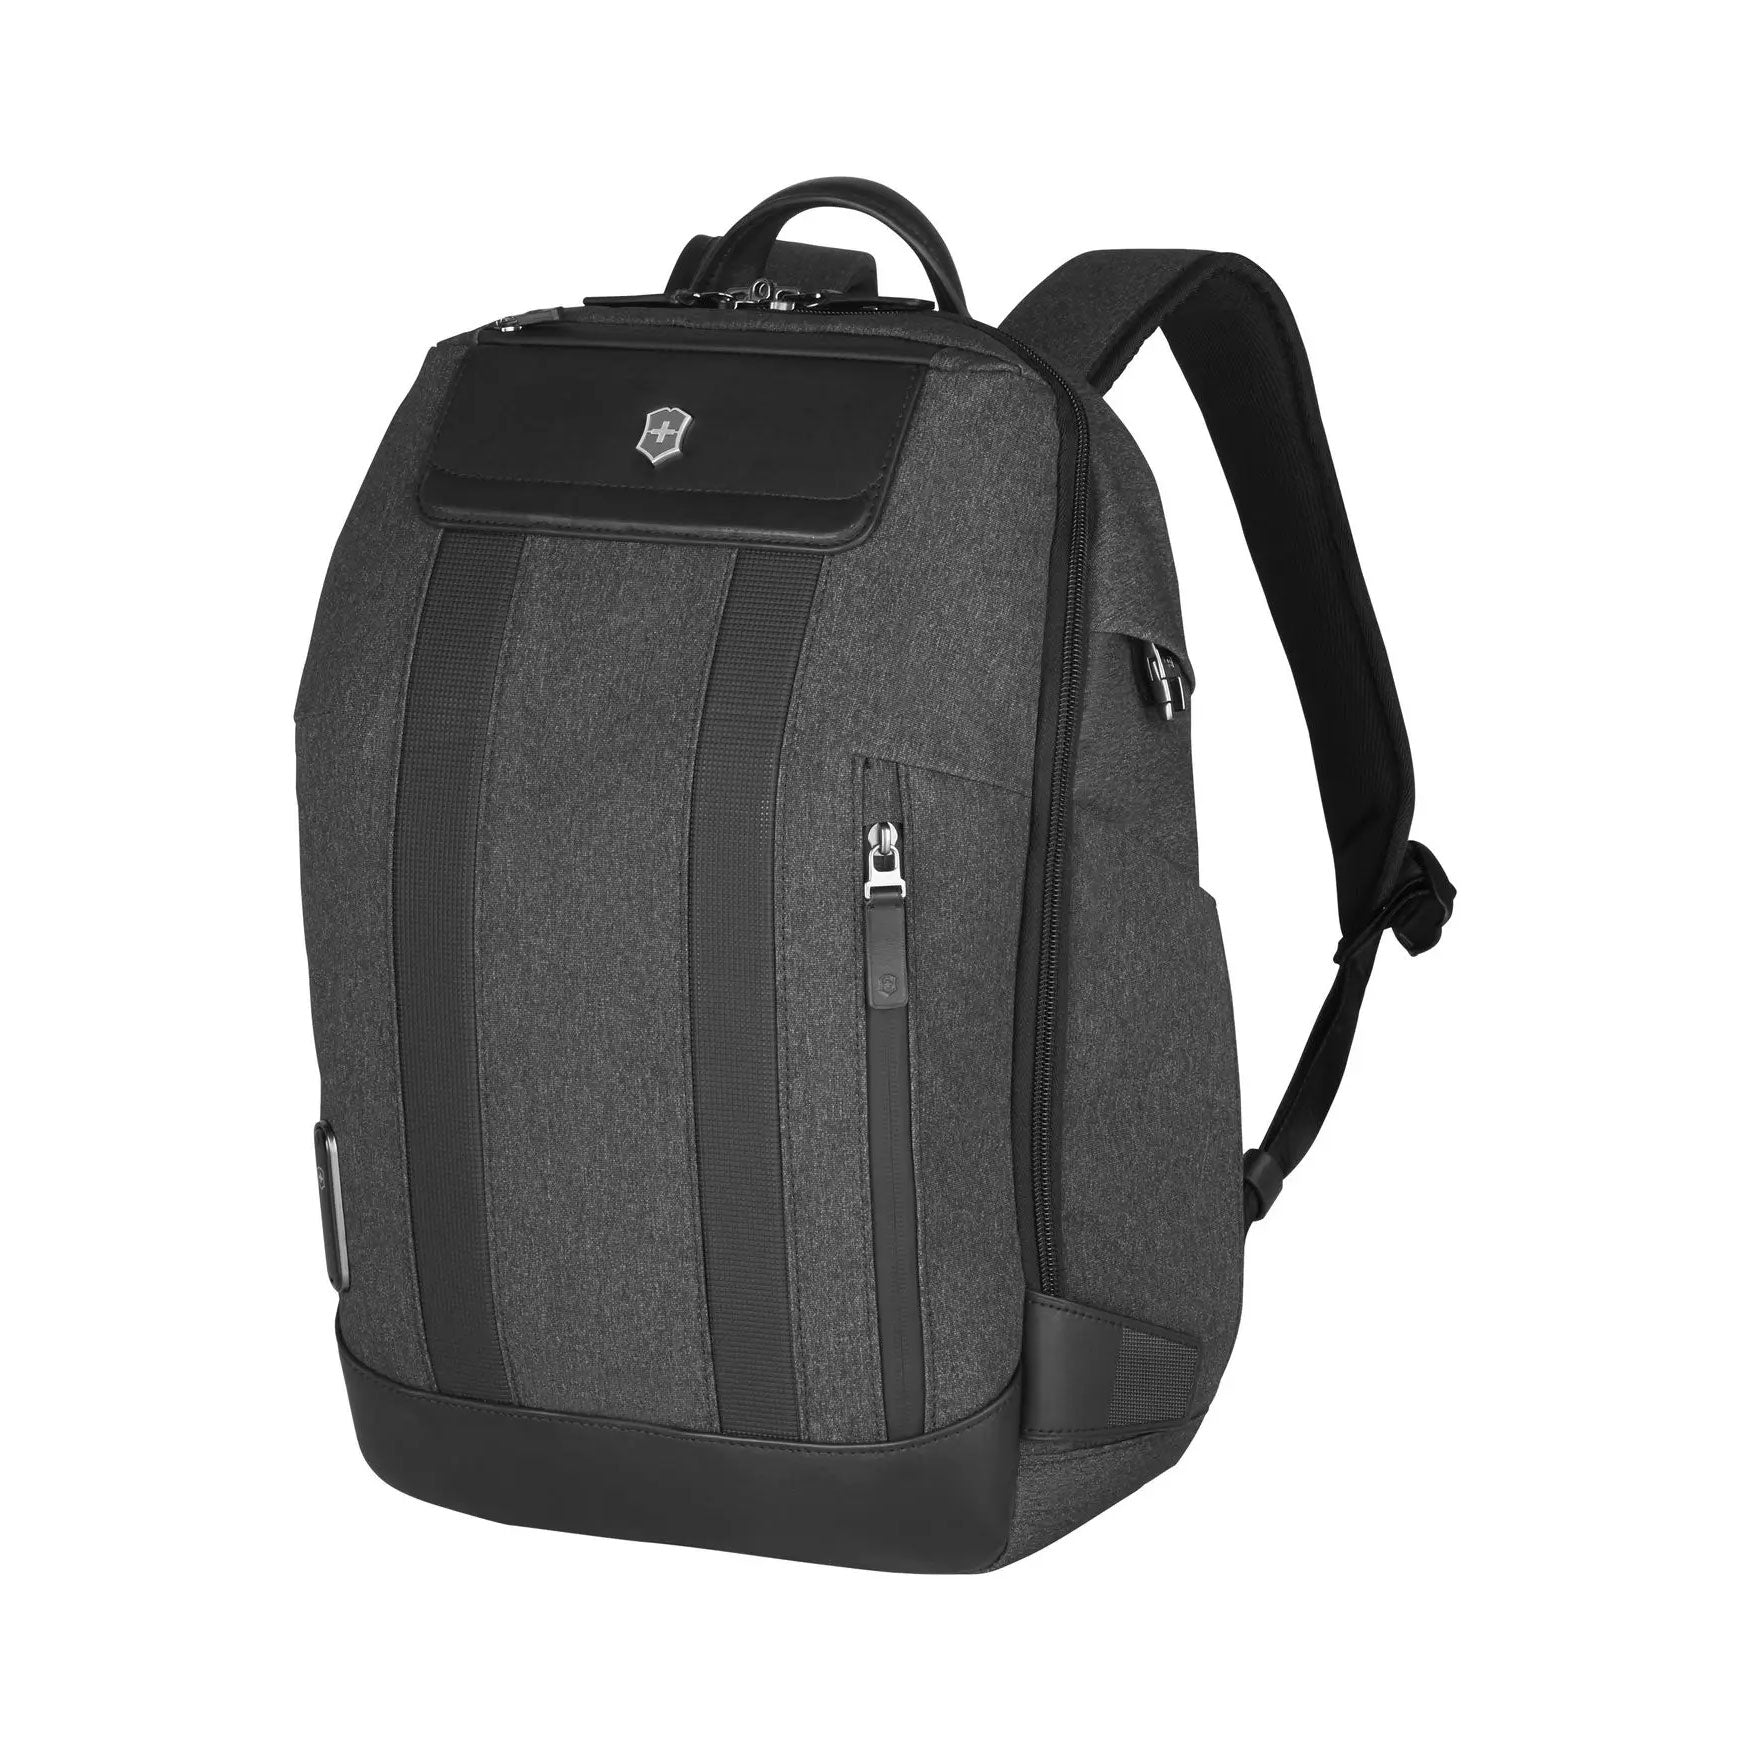 Victorinox Swiss Army Architecture Urban2 City Backpack